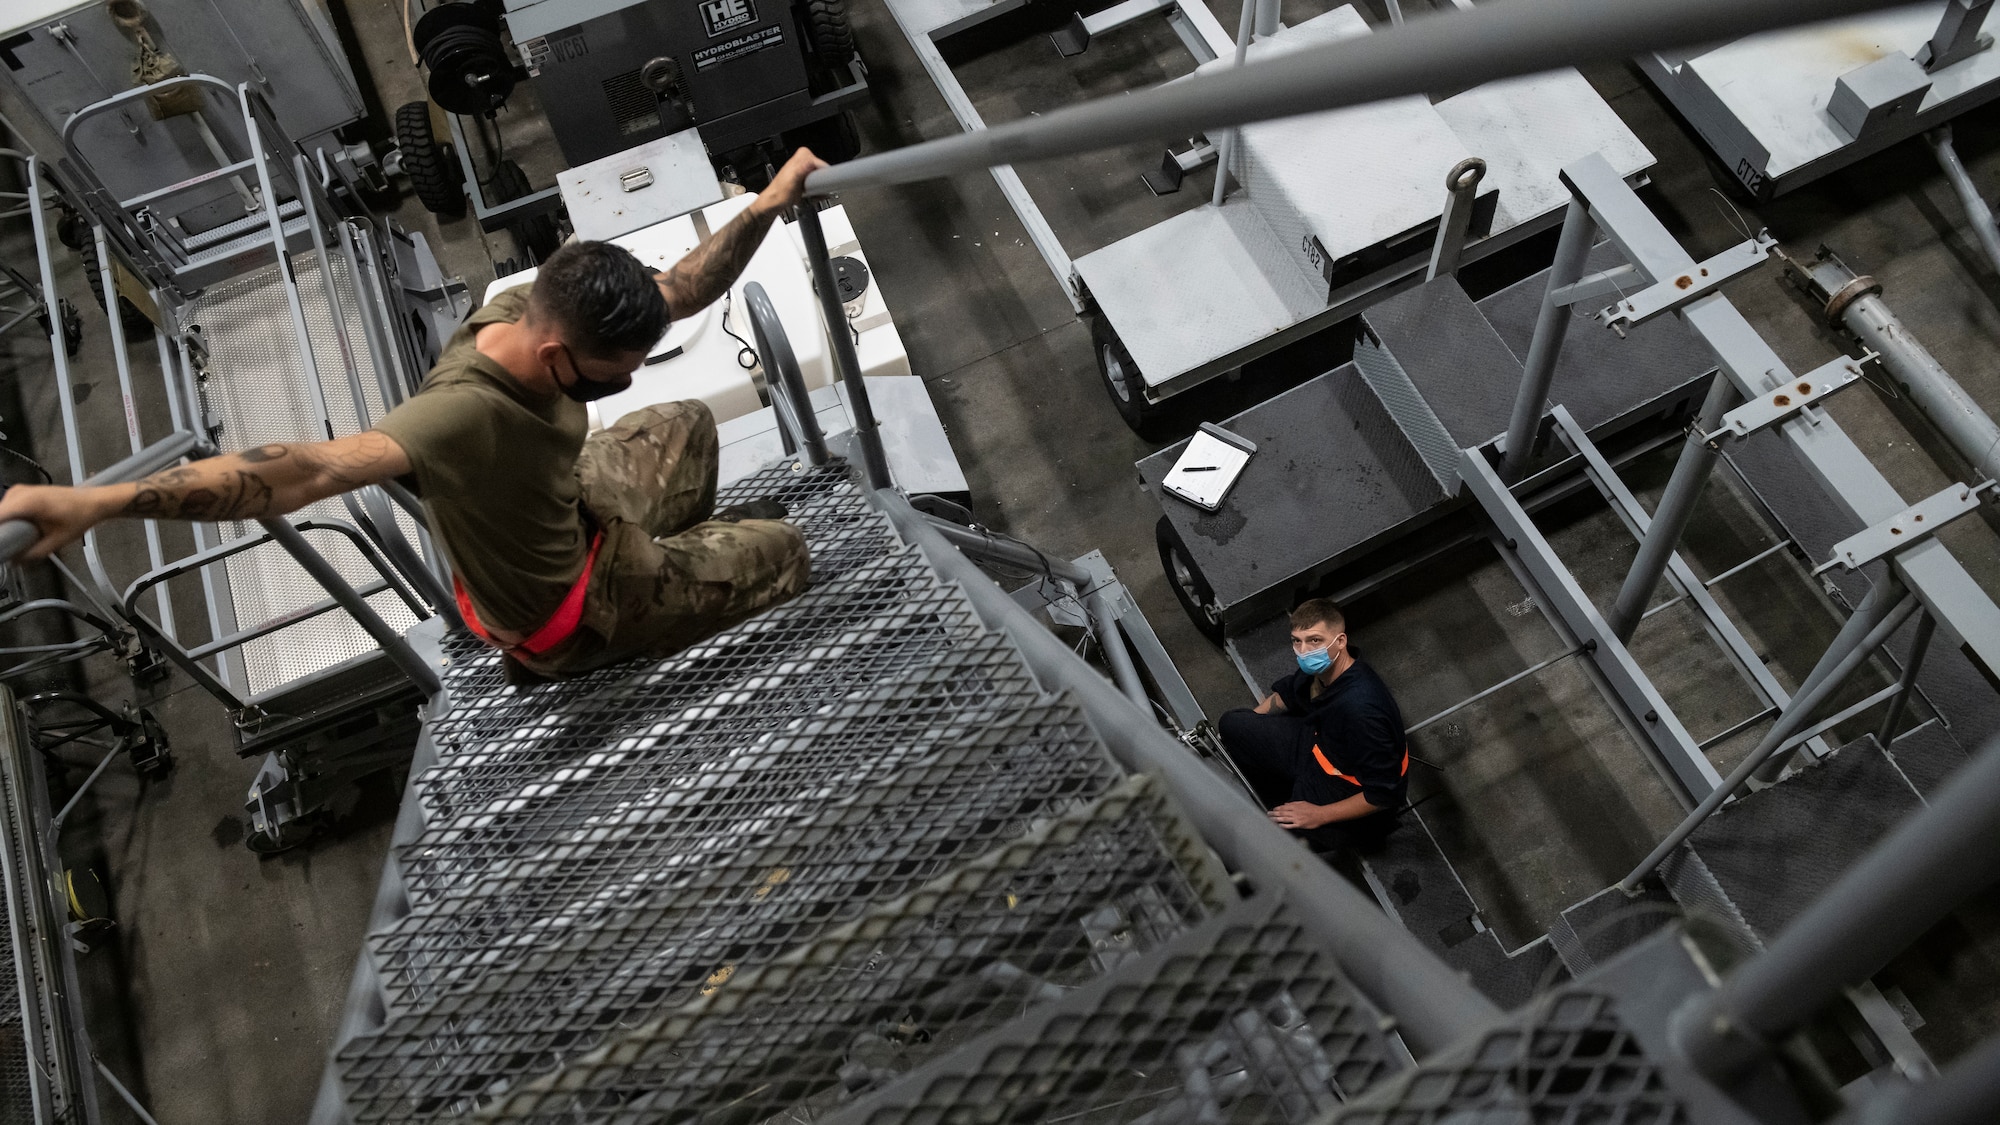 Airmen of the 18th Equipment Maintenance Squadron aerospace ground equipment flight work behind the scenes to ensure their inventory of equipment is ready for use on the flight line for maintenance operations and sortie support.